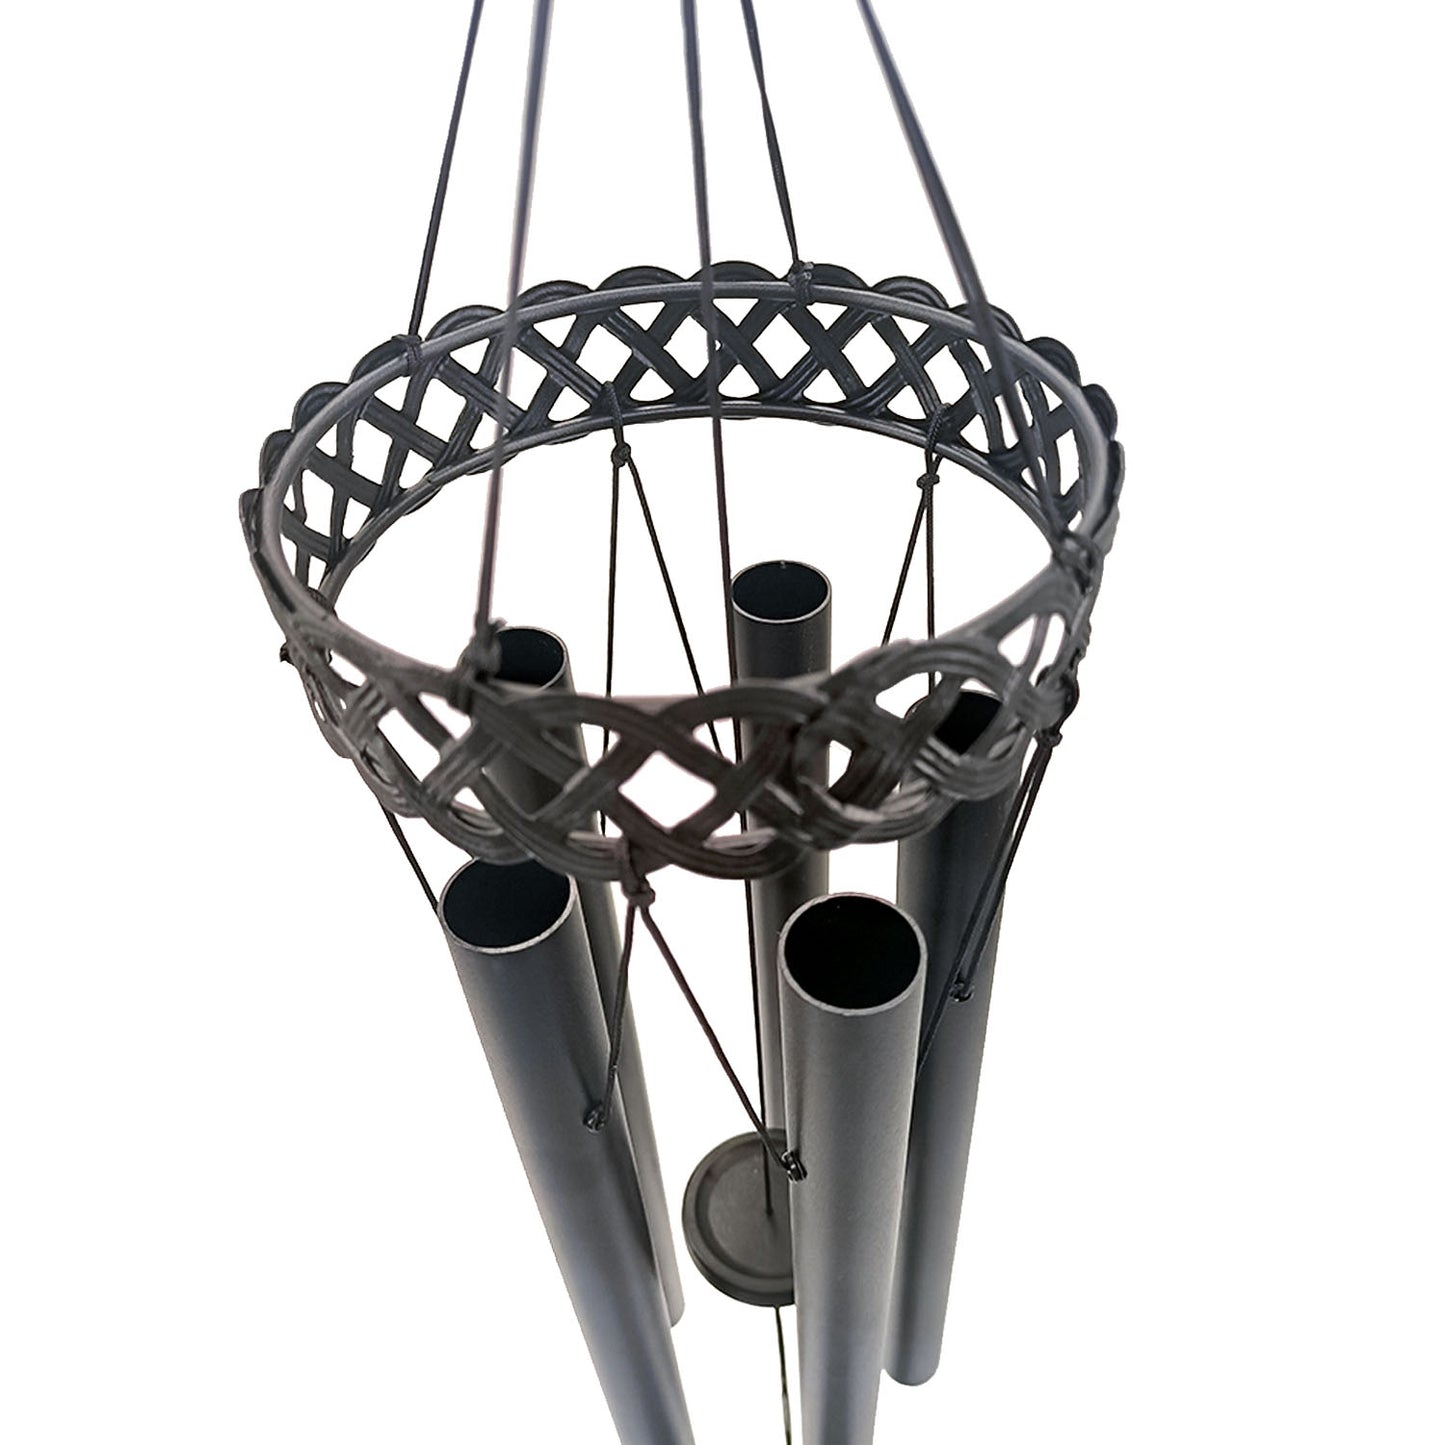 30-Inch Memorial Wind Chimes for Outdoors - Elegant Bereavement Gift with 5 Tuned Black Aluminum Tubes, Perfect for Home, Garden, Patio Décor